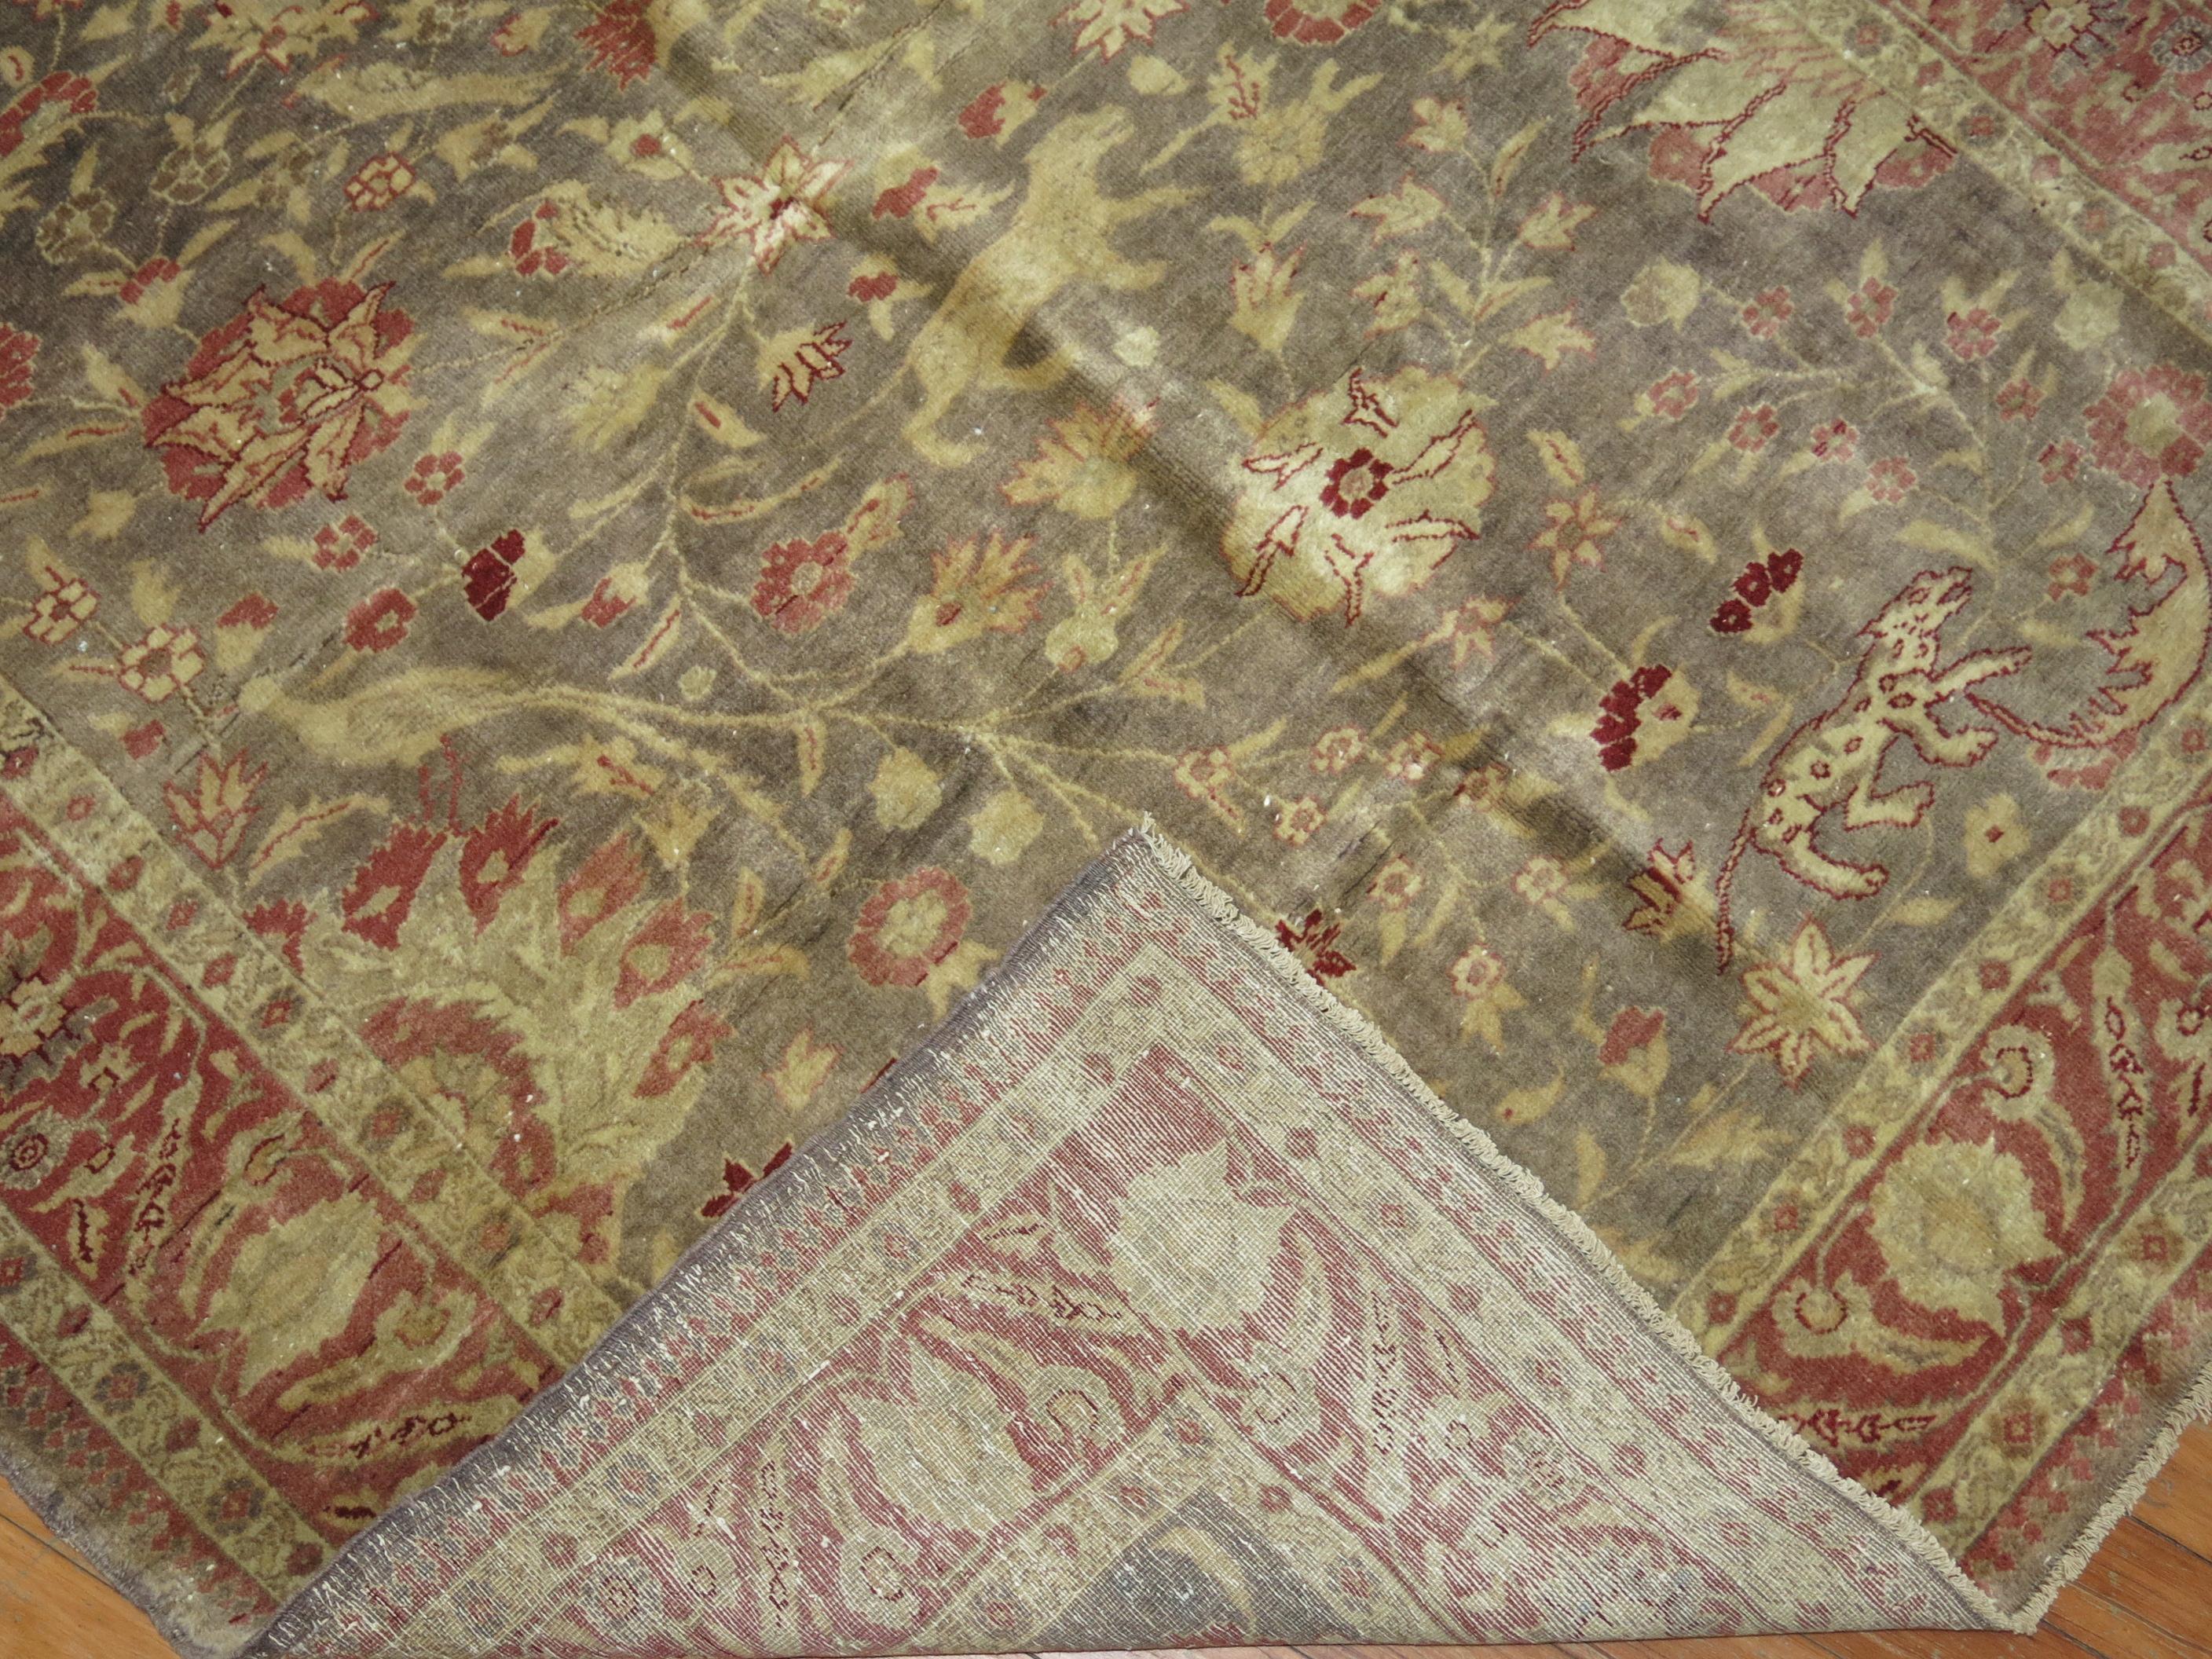 Accent size pictorial Turkish Sivas carpet from the first quarter of the 20th century. The gray field with a flurry of wild and exotic animals, accents in beige and crimson red. A conversation piece that would be fitting in foyer. Light enough to